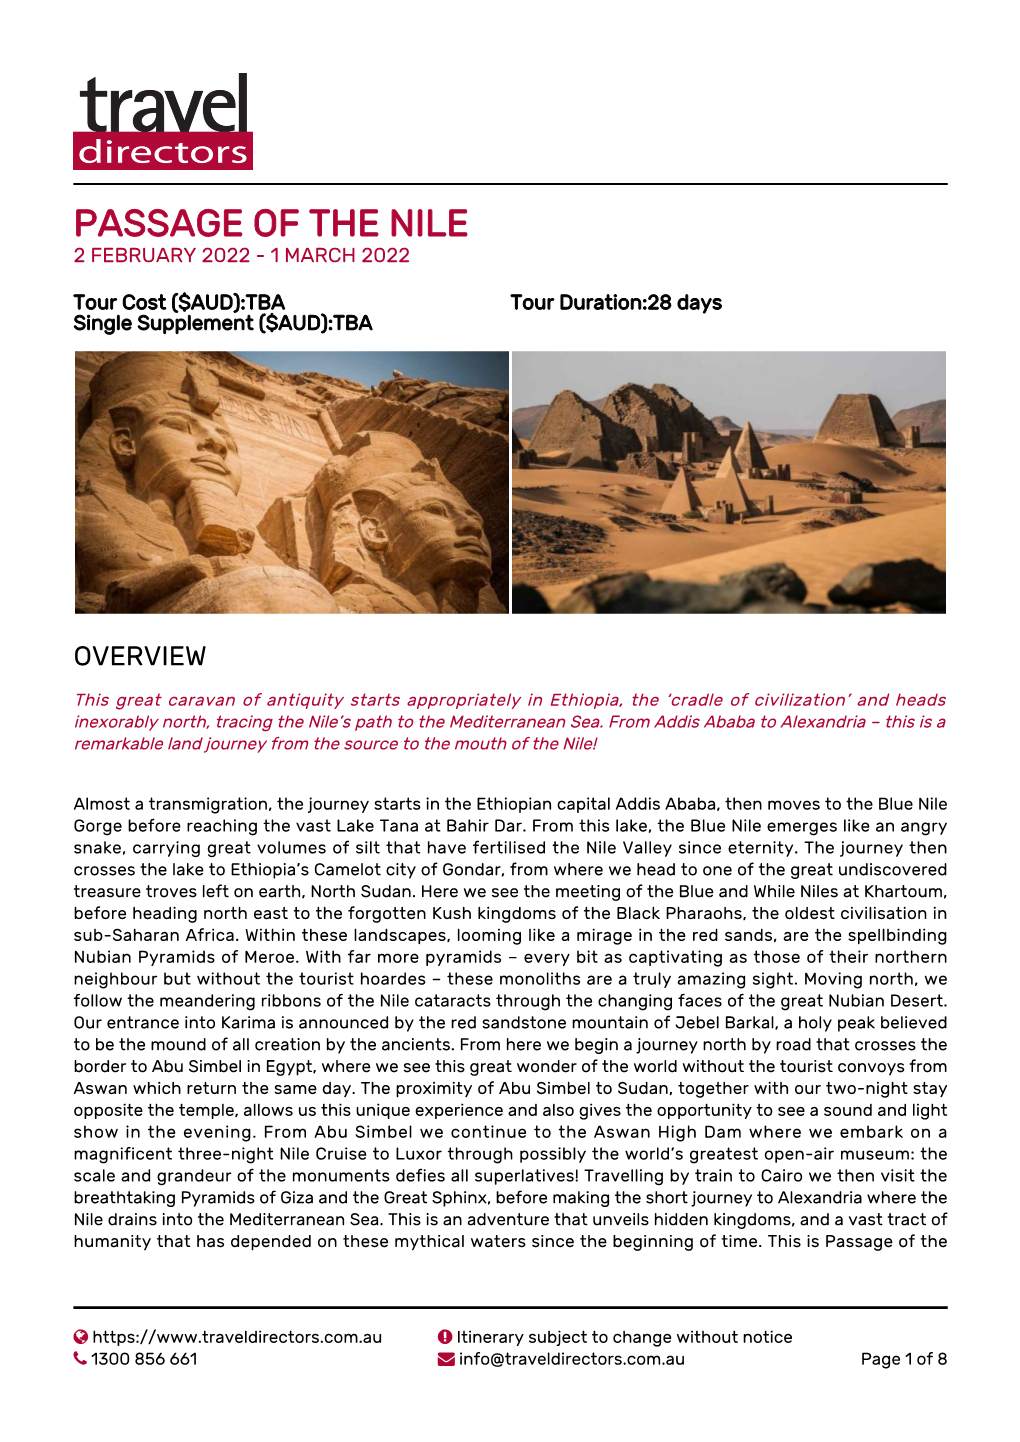 Passage of the Nile 2 February 2022 - 1 March 2022